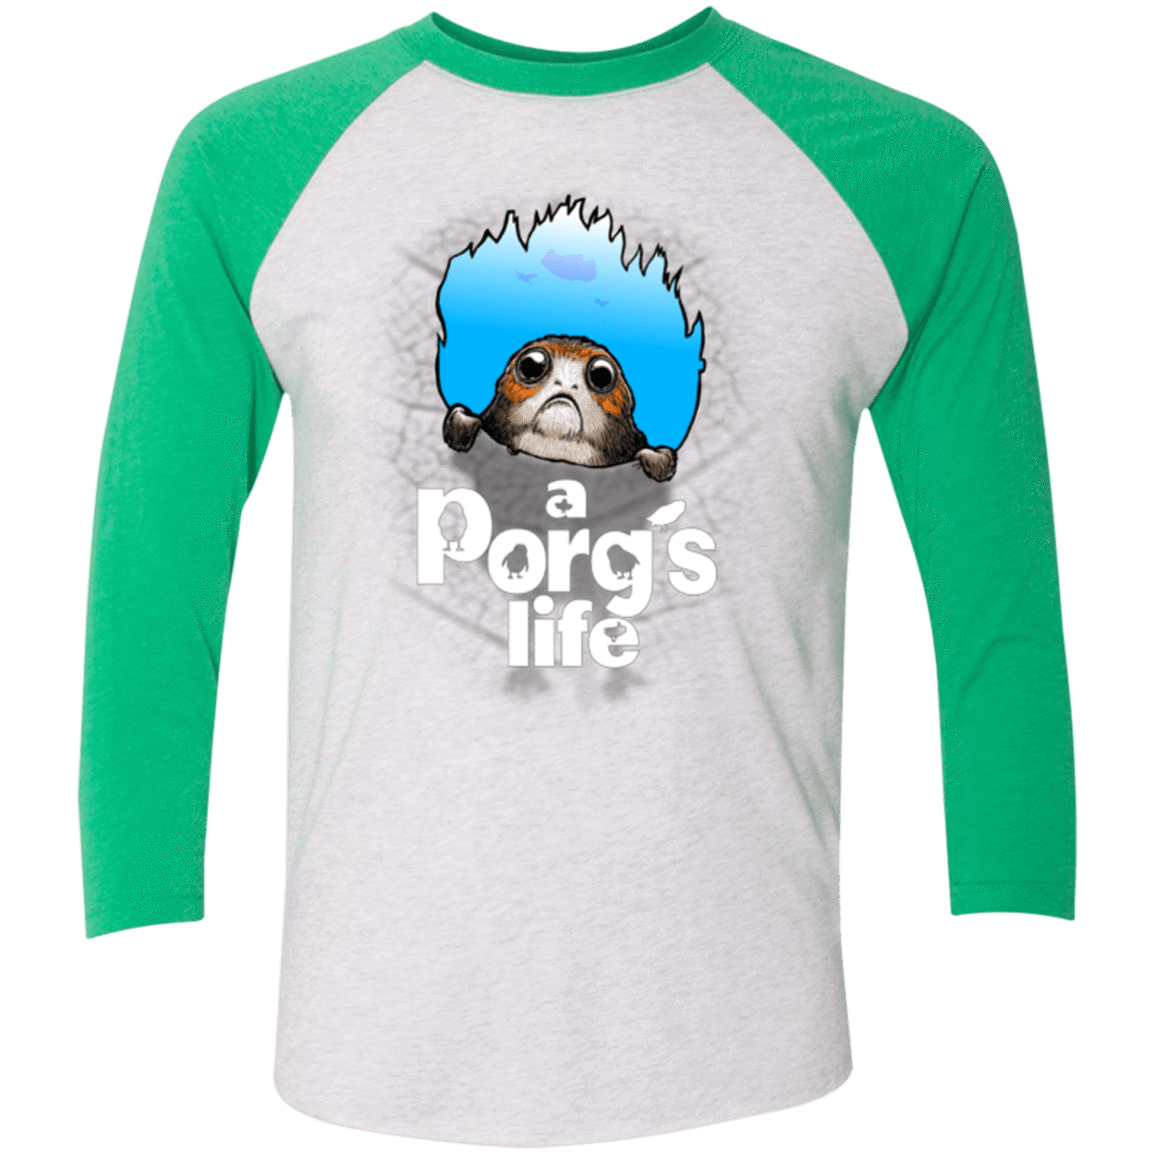 T-Shirts Heather White/Envy / X-Small A Porgs Life Men's Triblend 3/4 Sleeve